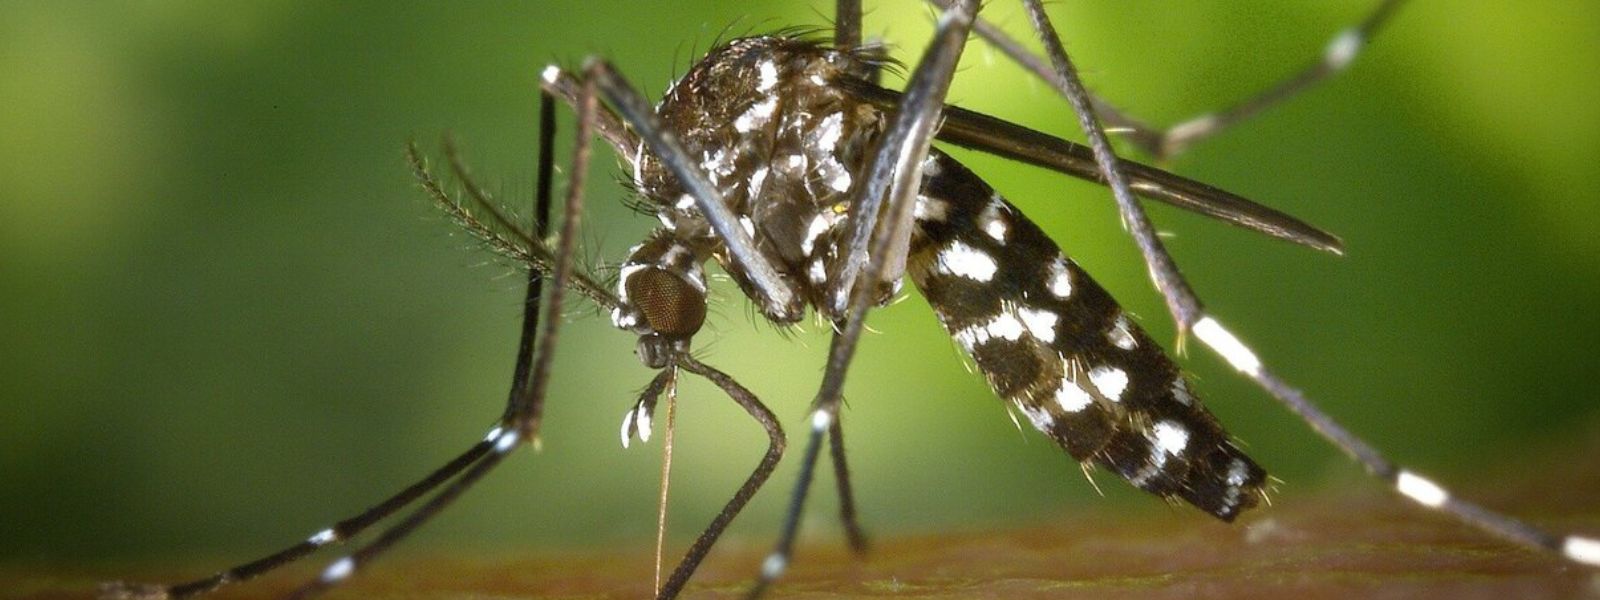 Dengue cases expected to rise during monsoon season